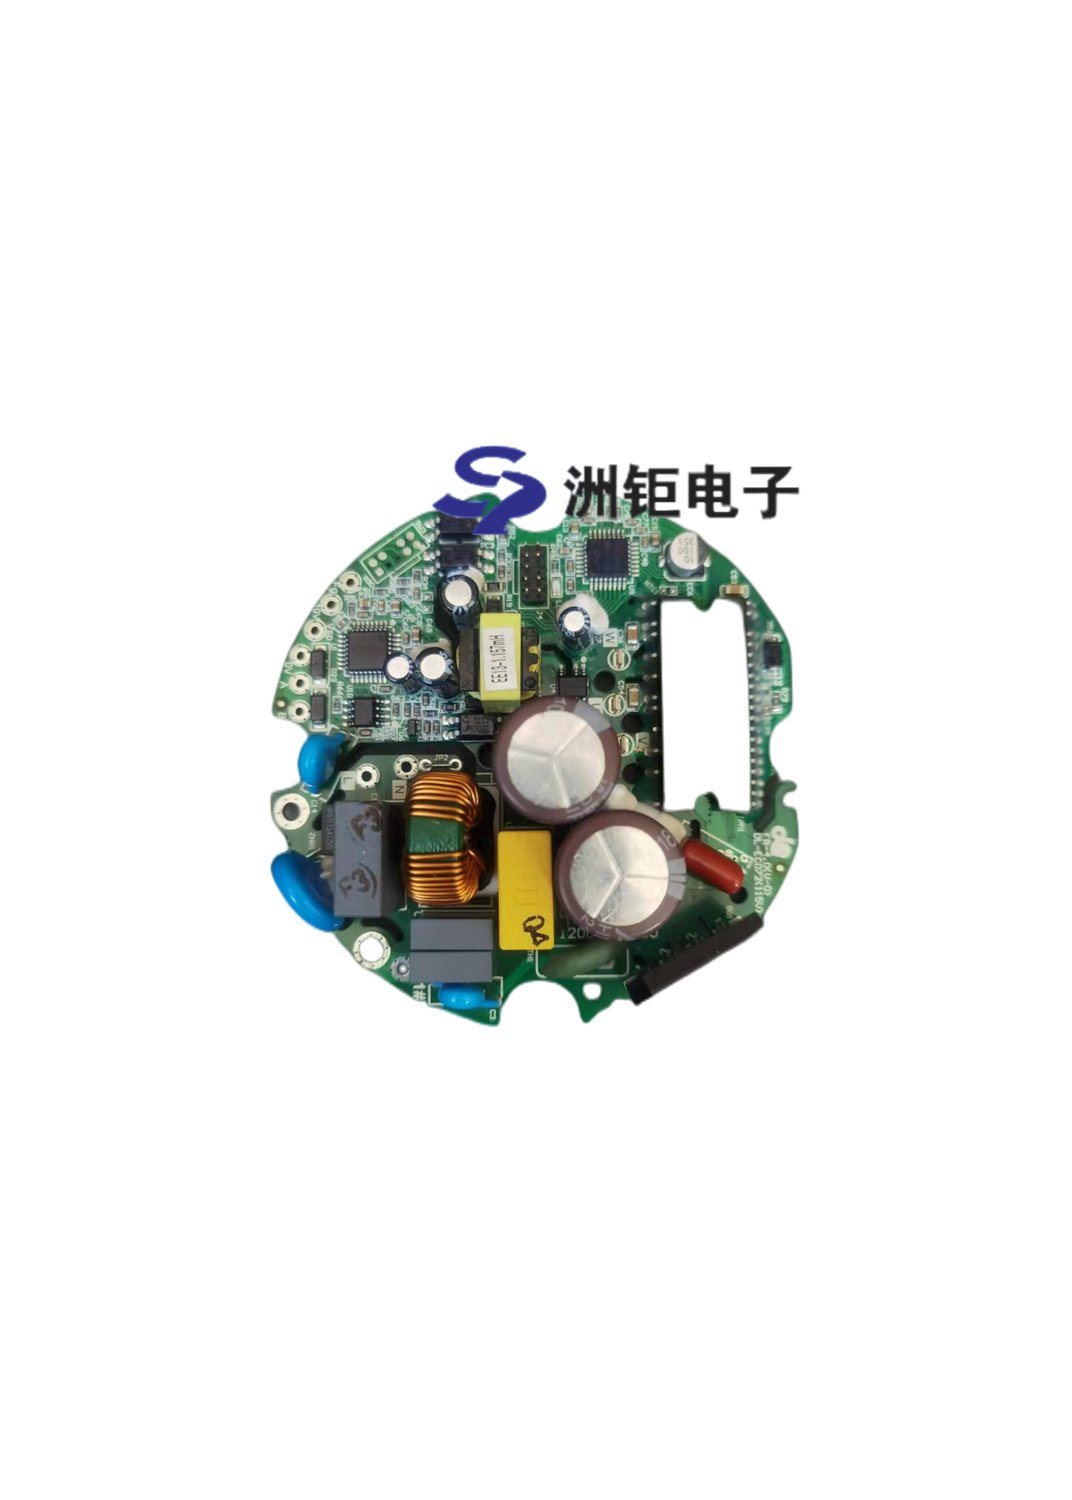 (170W-115V) <font color='red'>Driver</font> <font color='red'>Board</font> by Sp Made in China